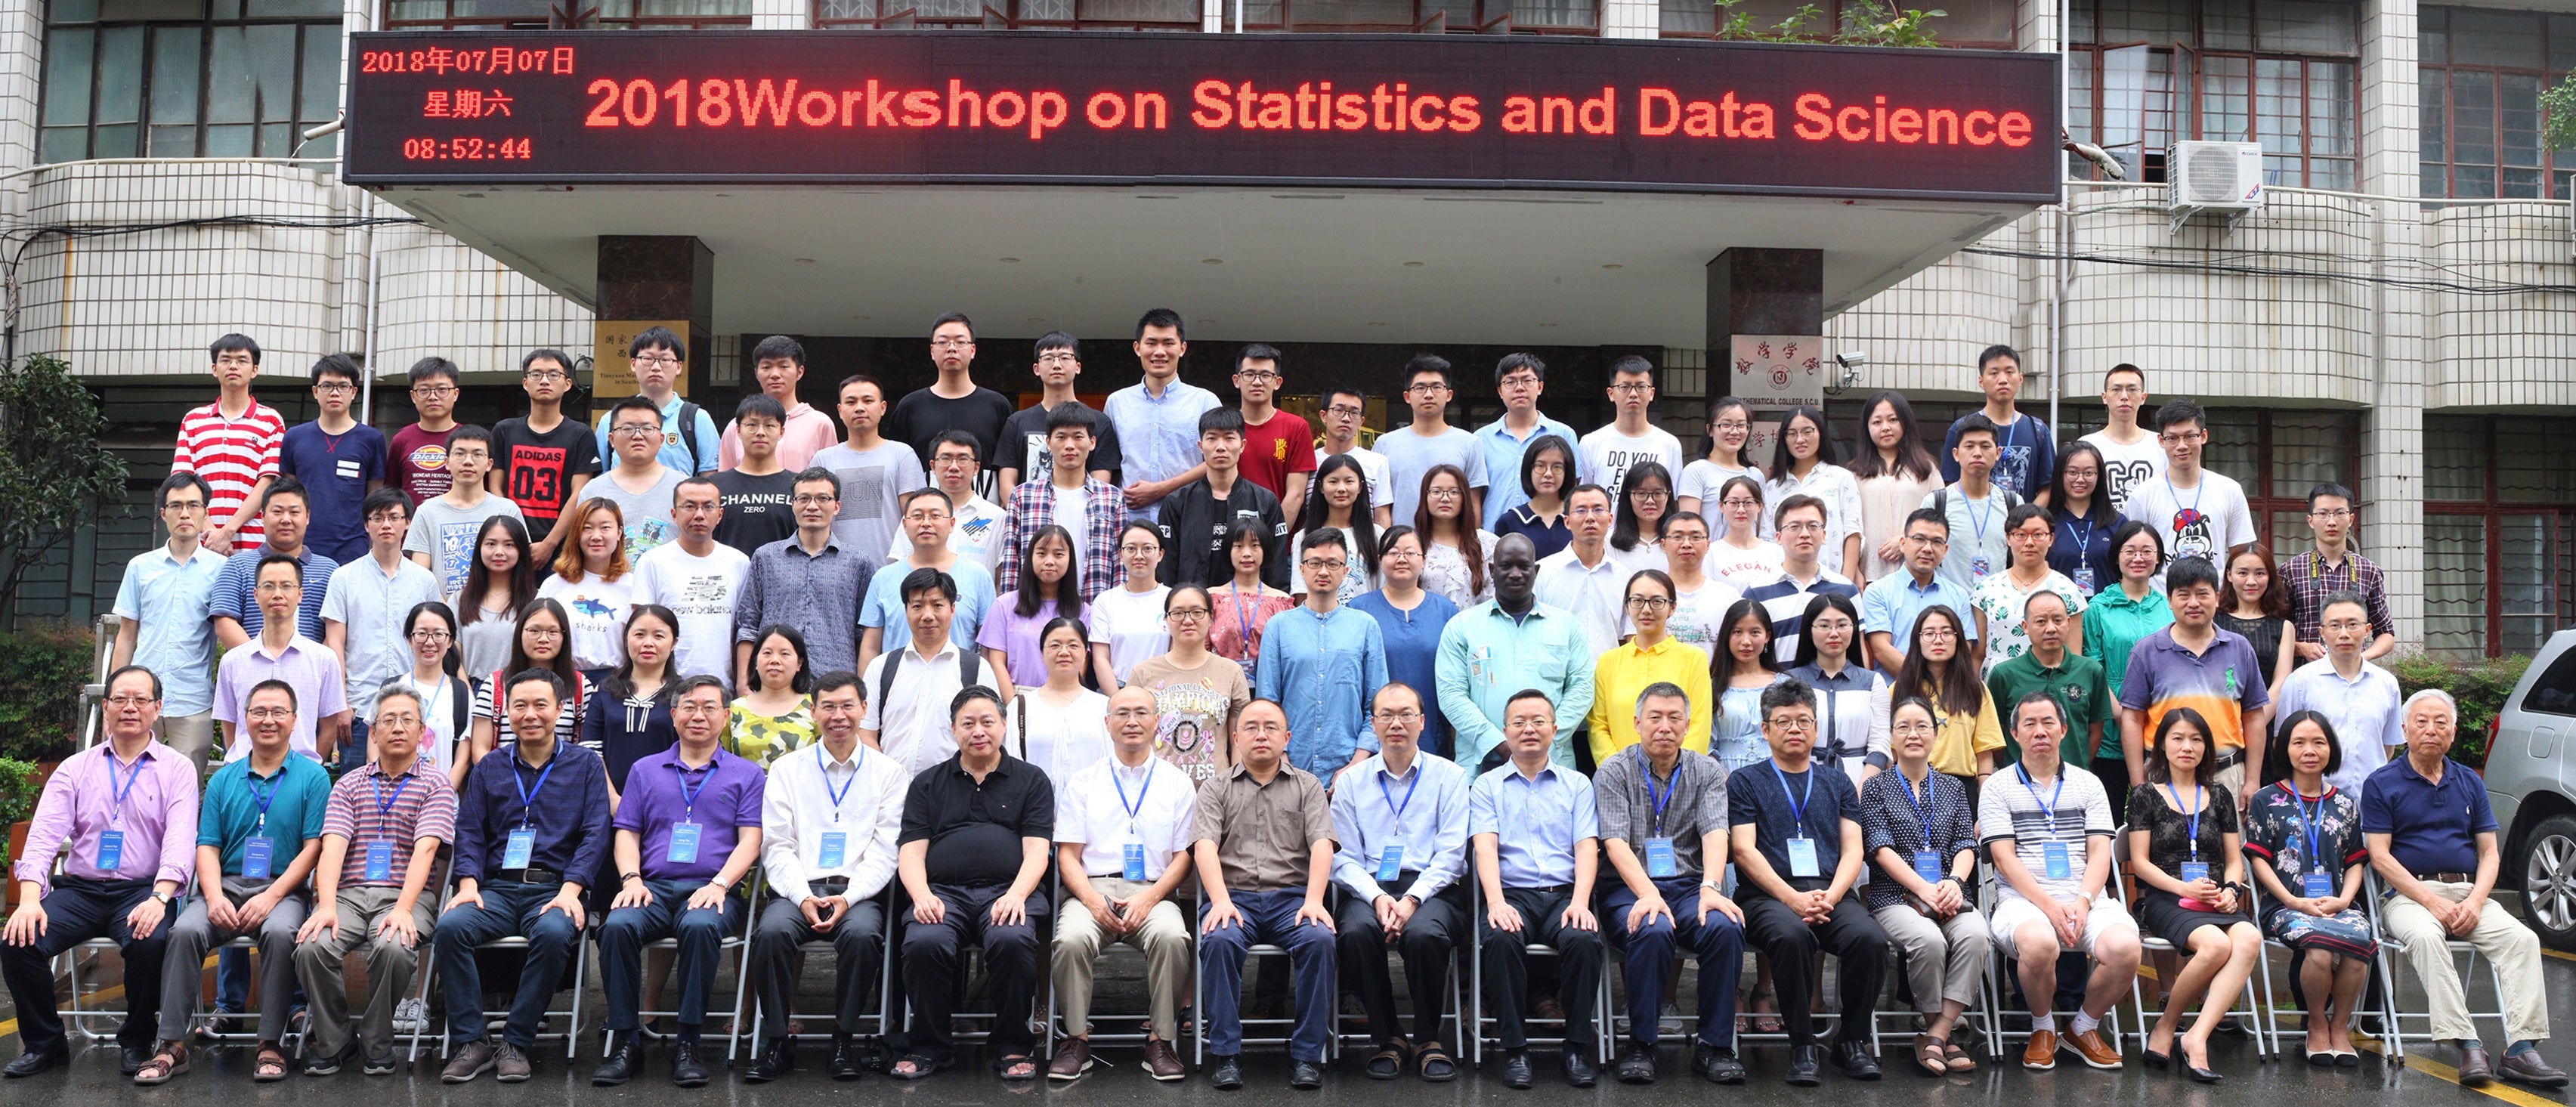 Dr. Ming Tan with fellow Workshop participants in Chengdu, China.